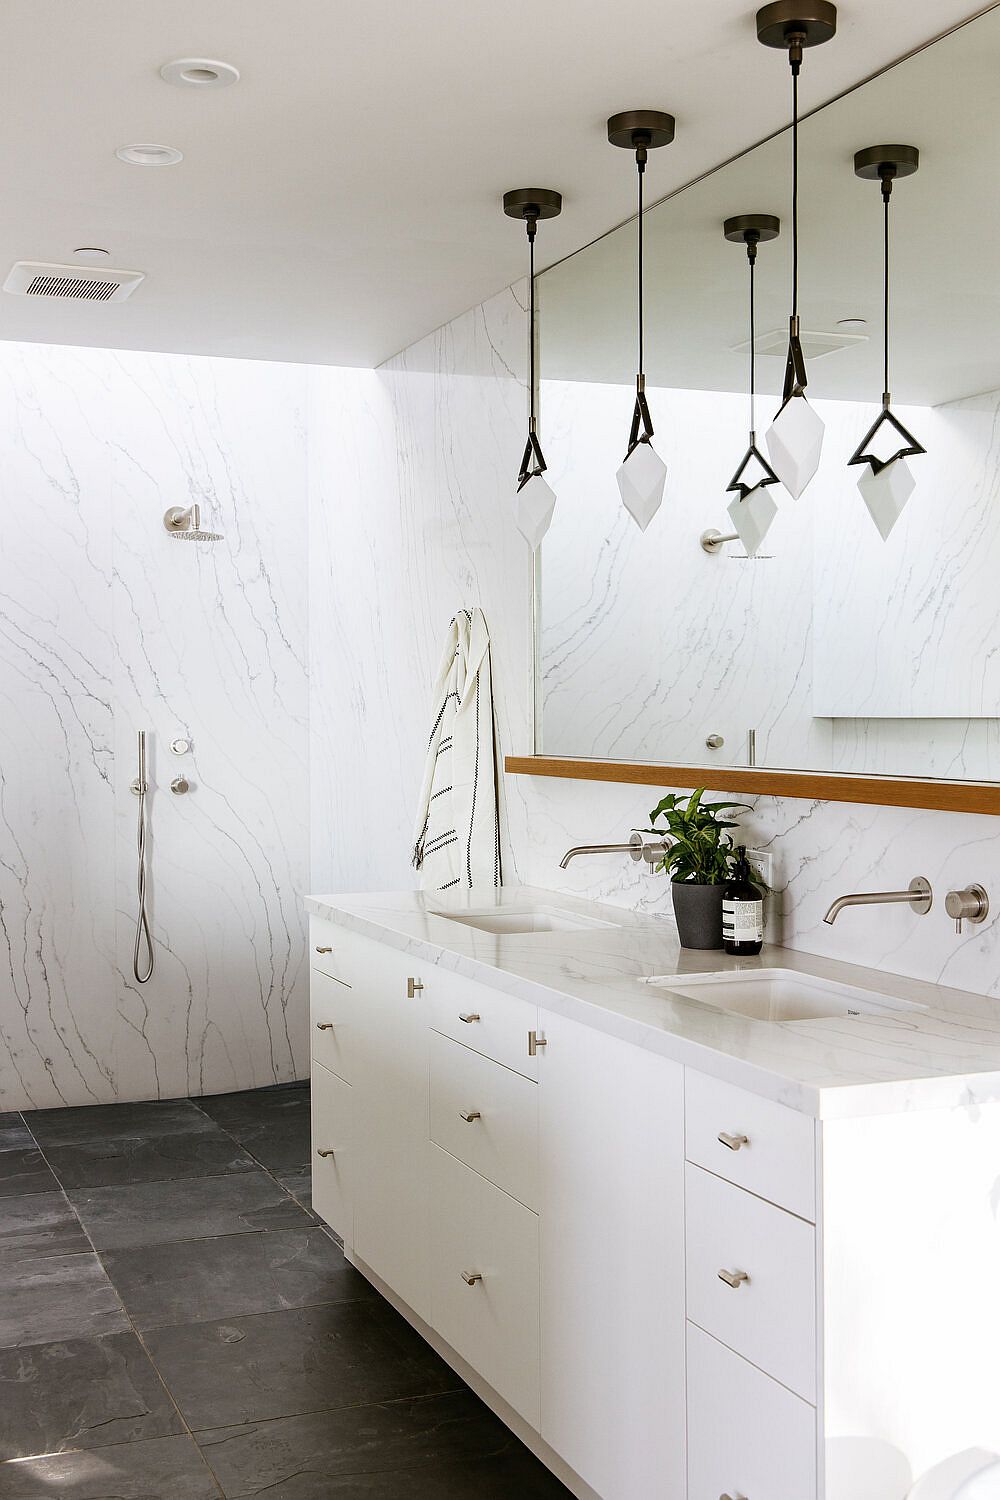 Marble finishes and countertops in the bathroom are coupled with dark stone flooring